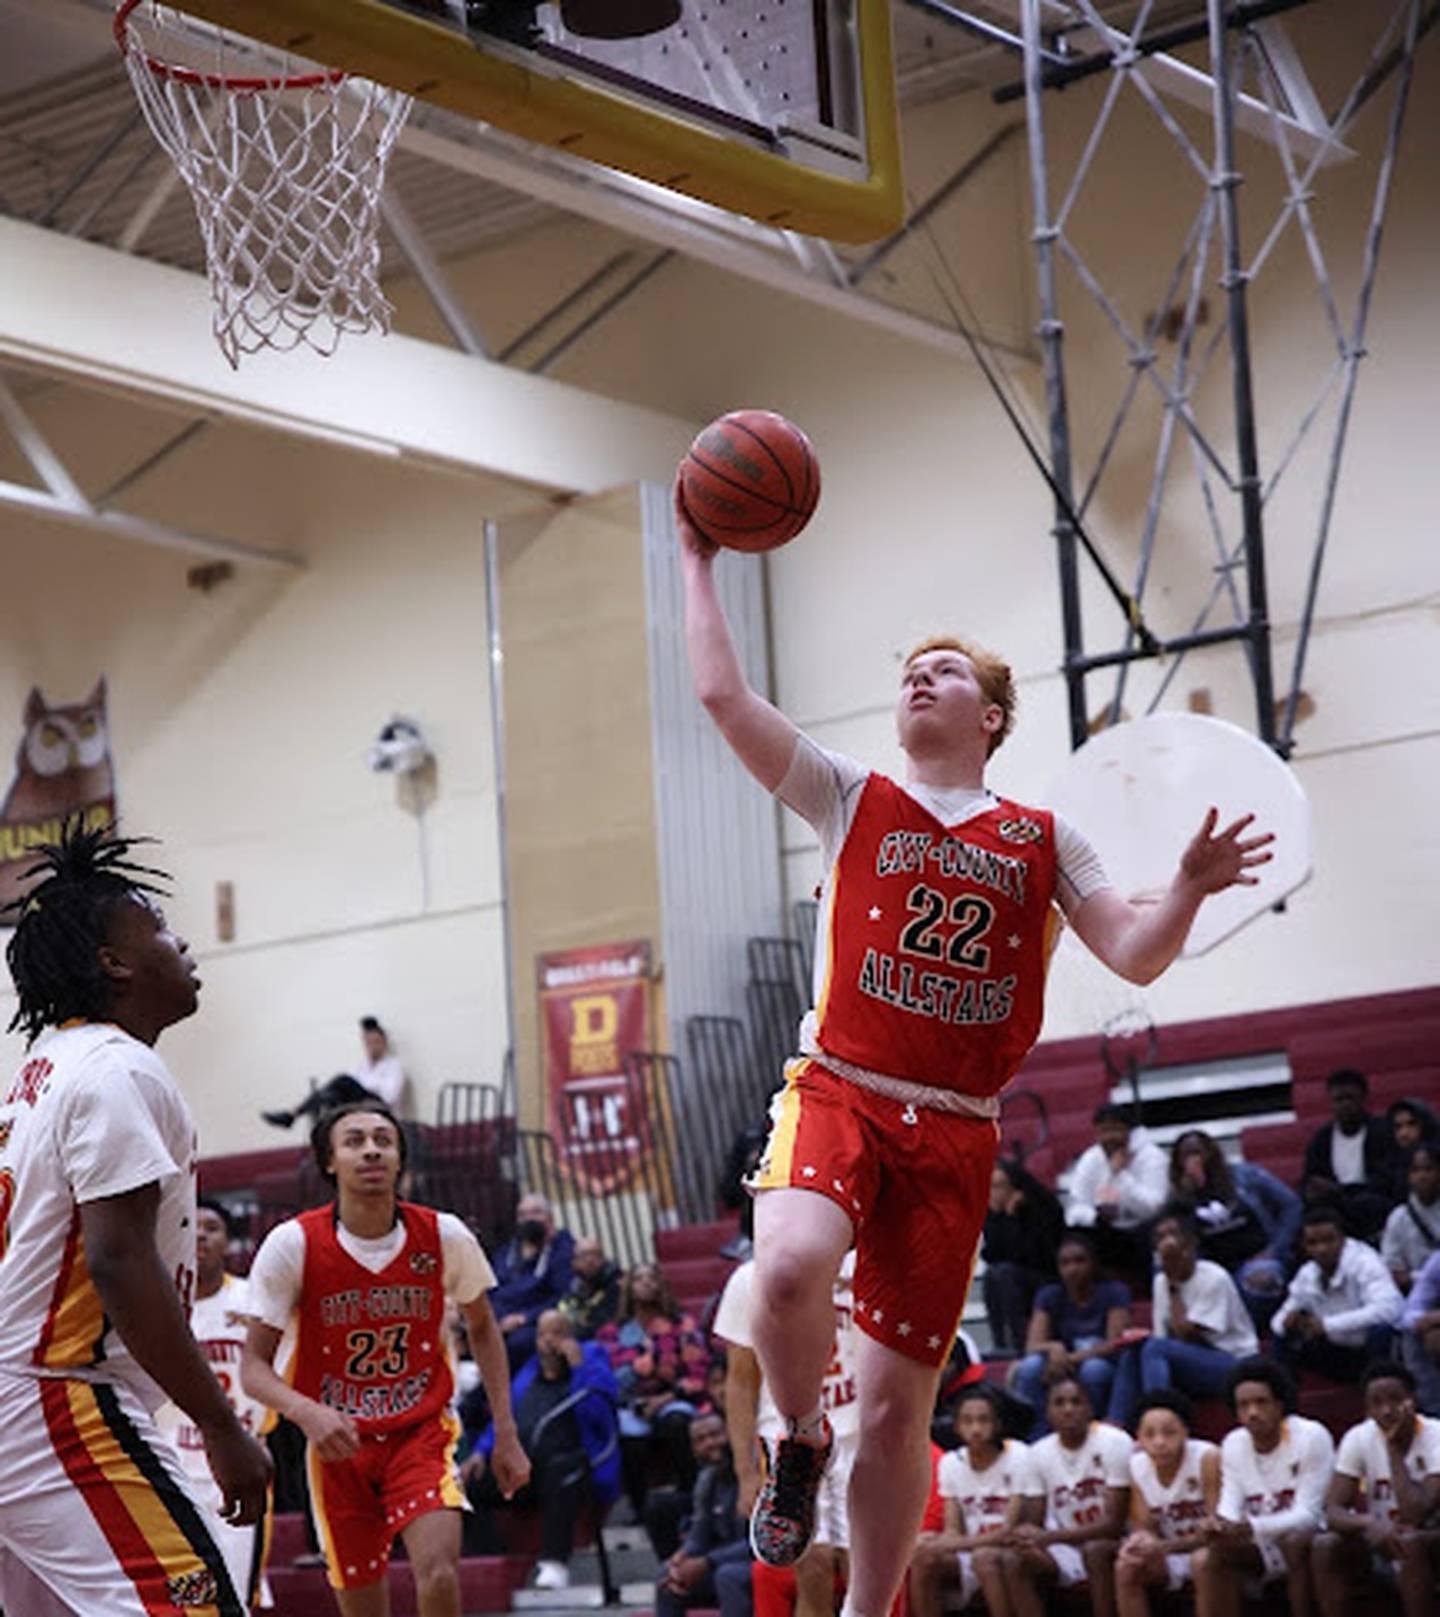 Cole Harshmann goes up for a shot during Friday's City/County boys basketball senior All-Star game. Harshmann from Catonsville had 5 points as the Baltimore County defeated the City  at Dunbar.